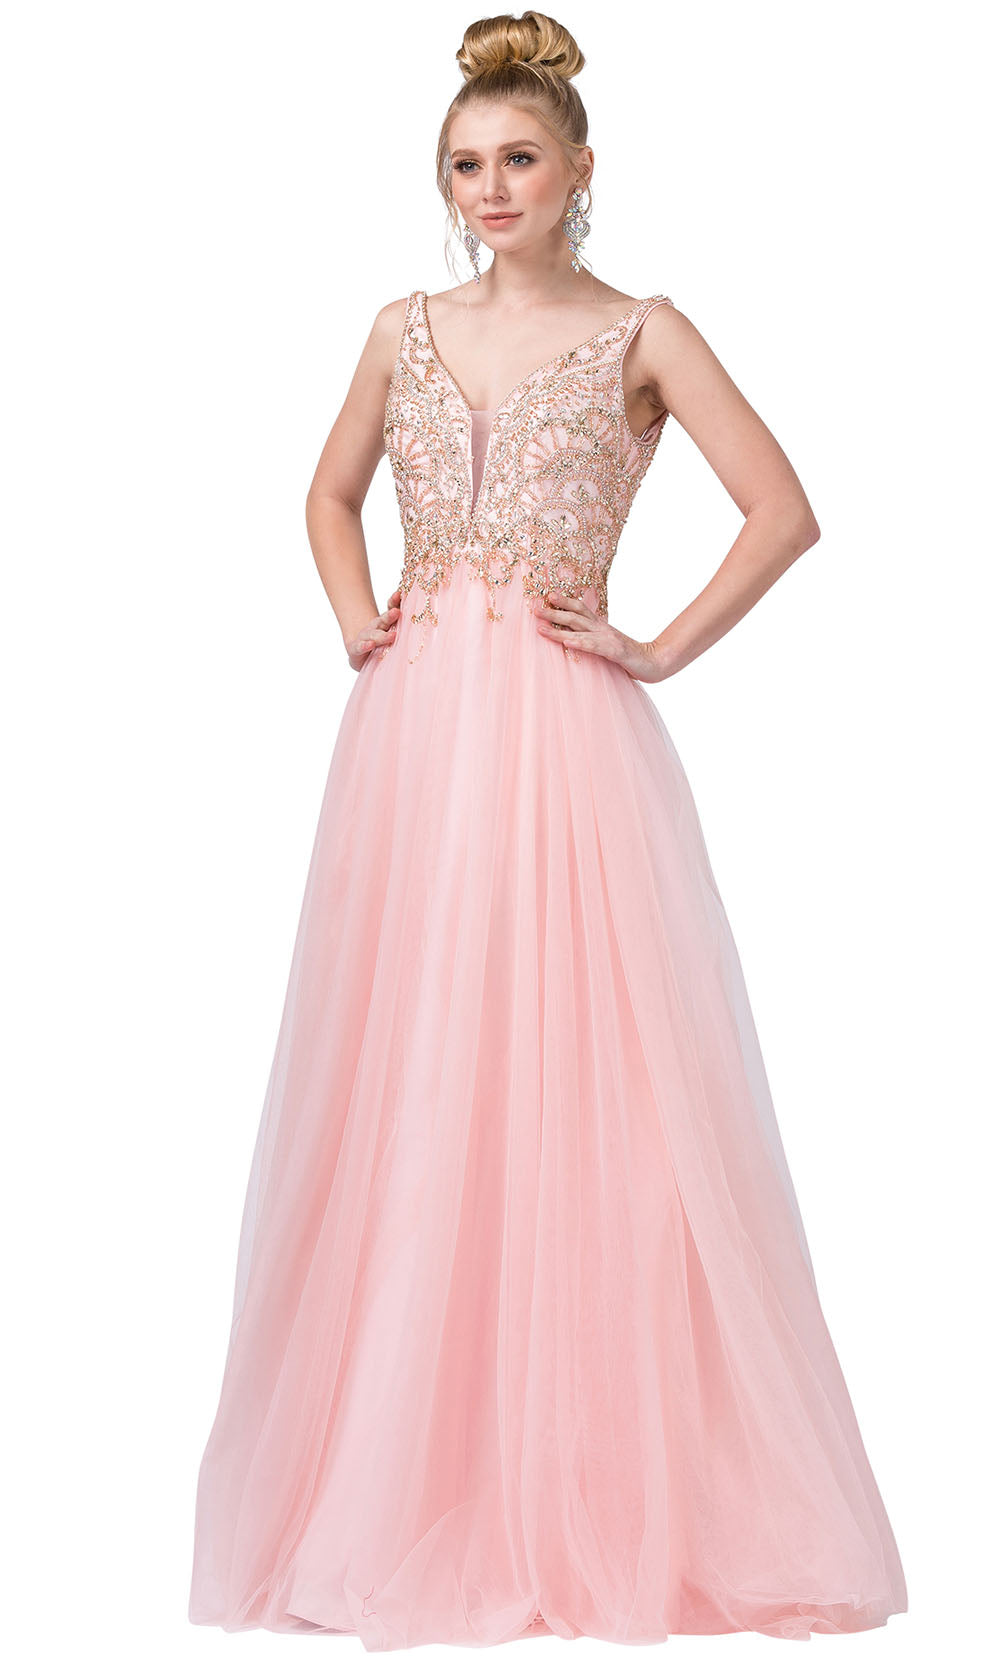 Dancing Queen - 2514 Beaded Plunging V-Neck A-Line Dress In Pink